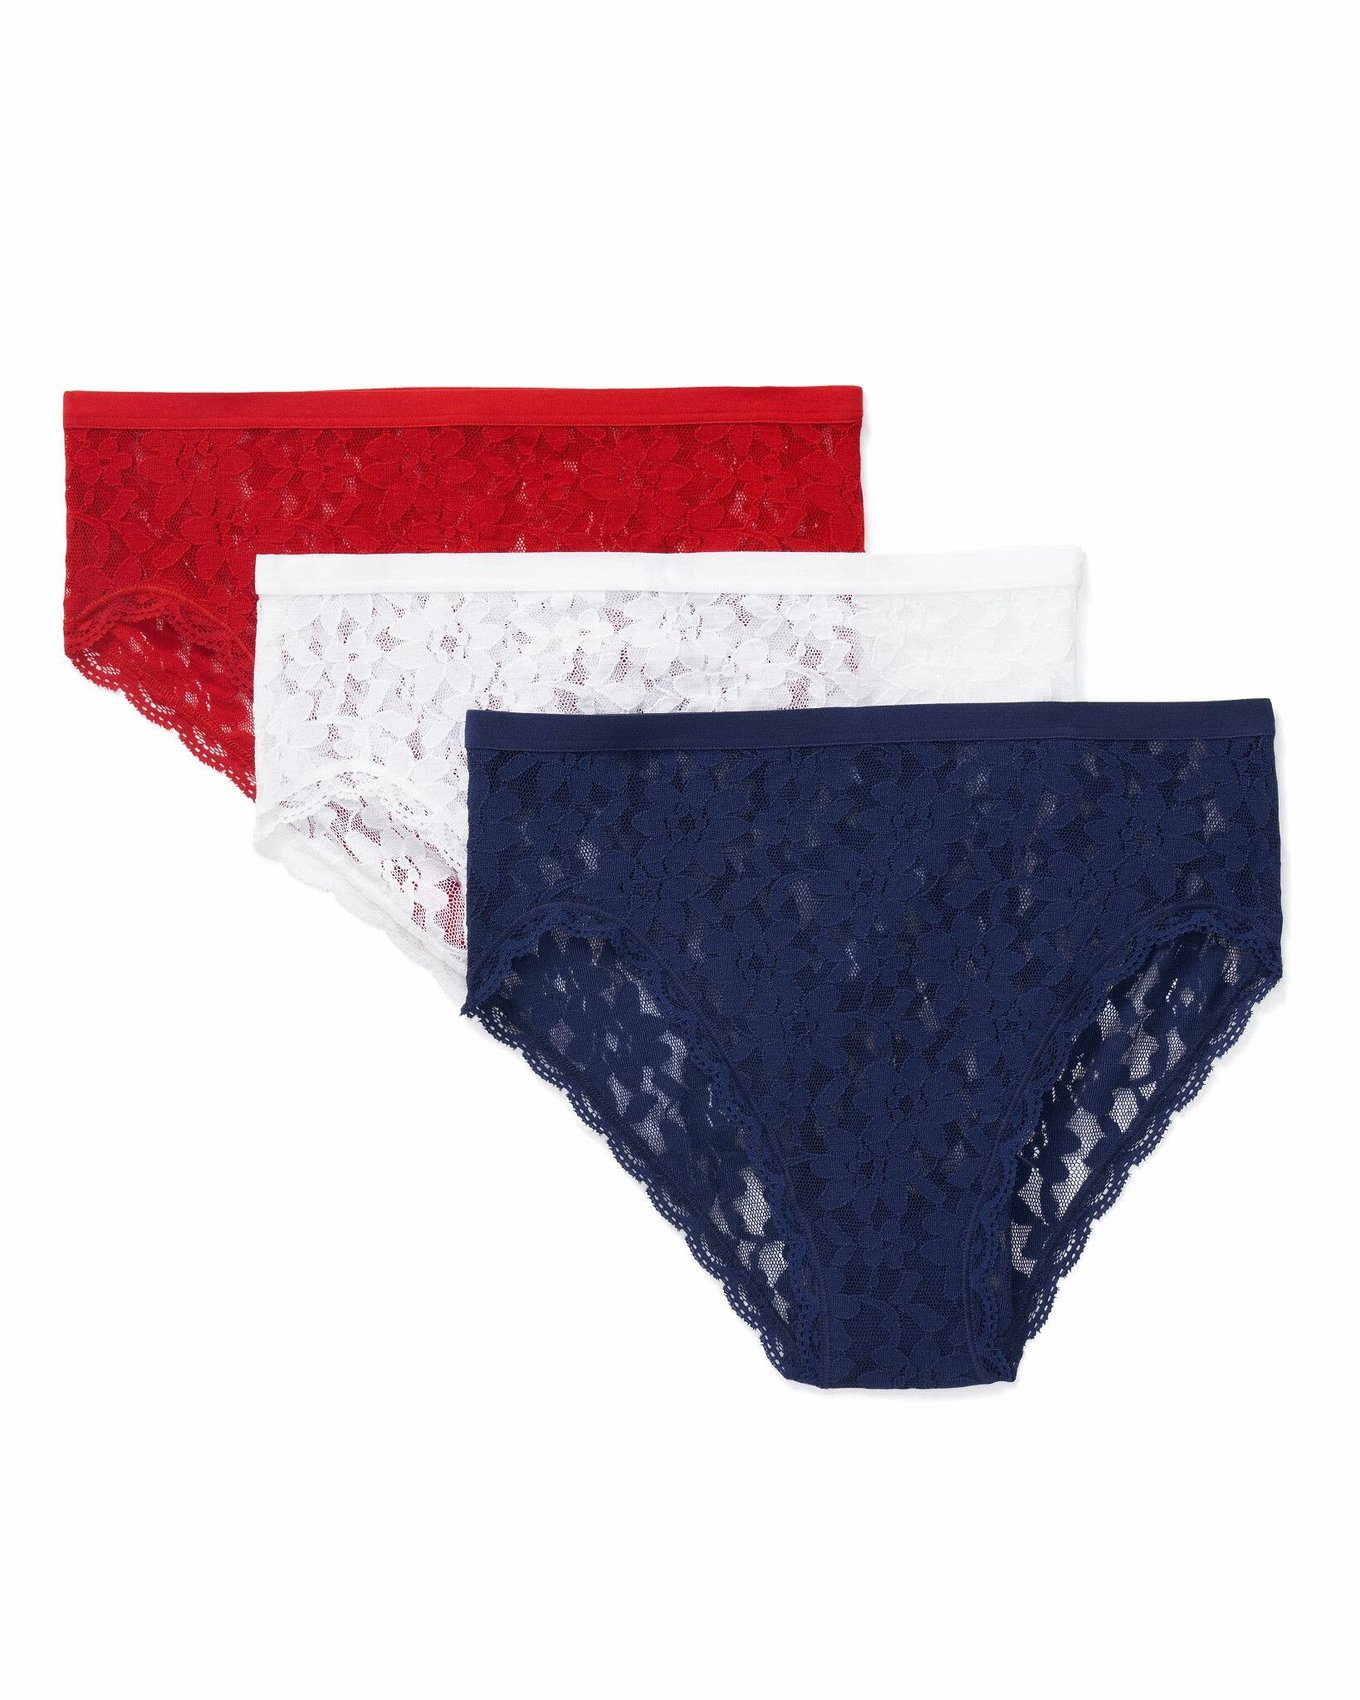 3 Pack Sexy Women High Waist Lace Underwear Full Cover Panty Brief